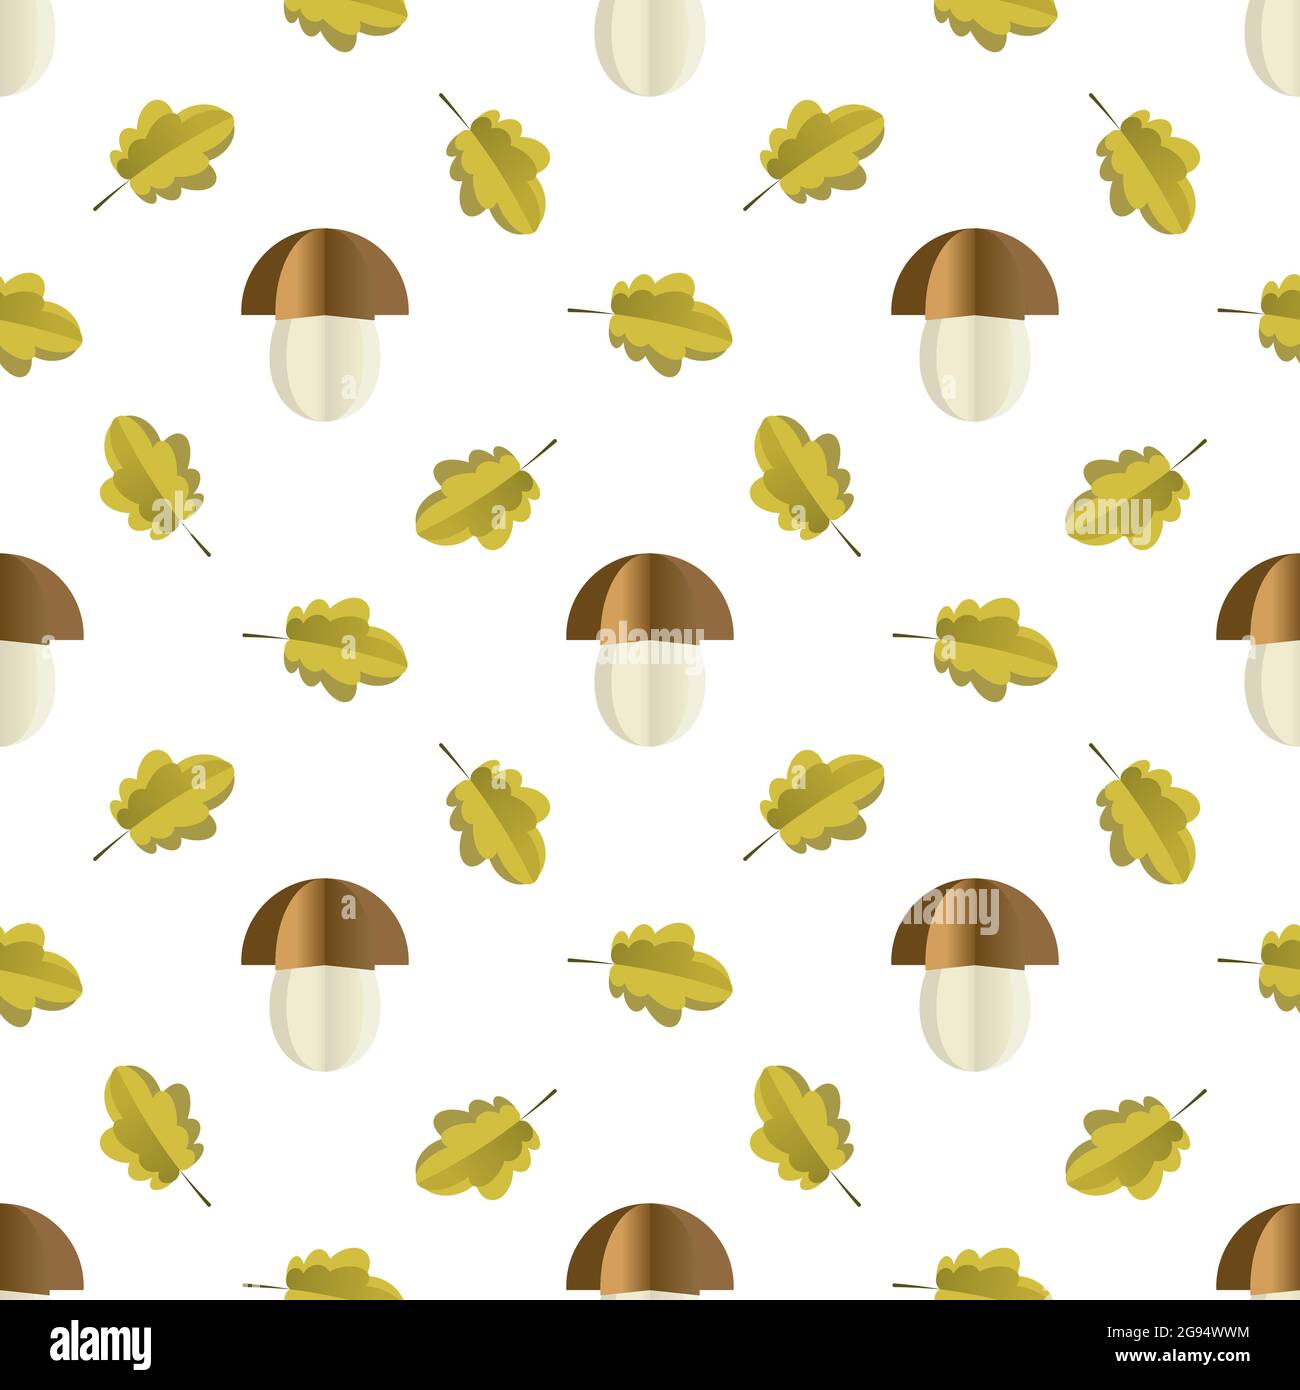 Colorful seamless pattern of mushrooms and leaves cut out of paper Stock Vector